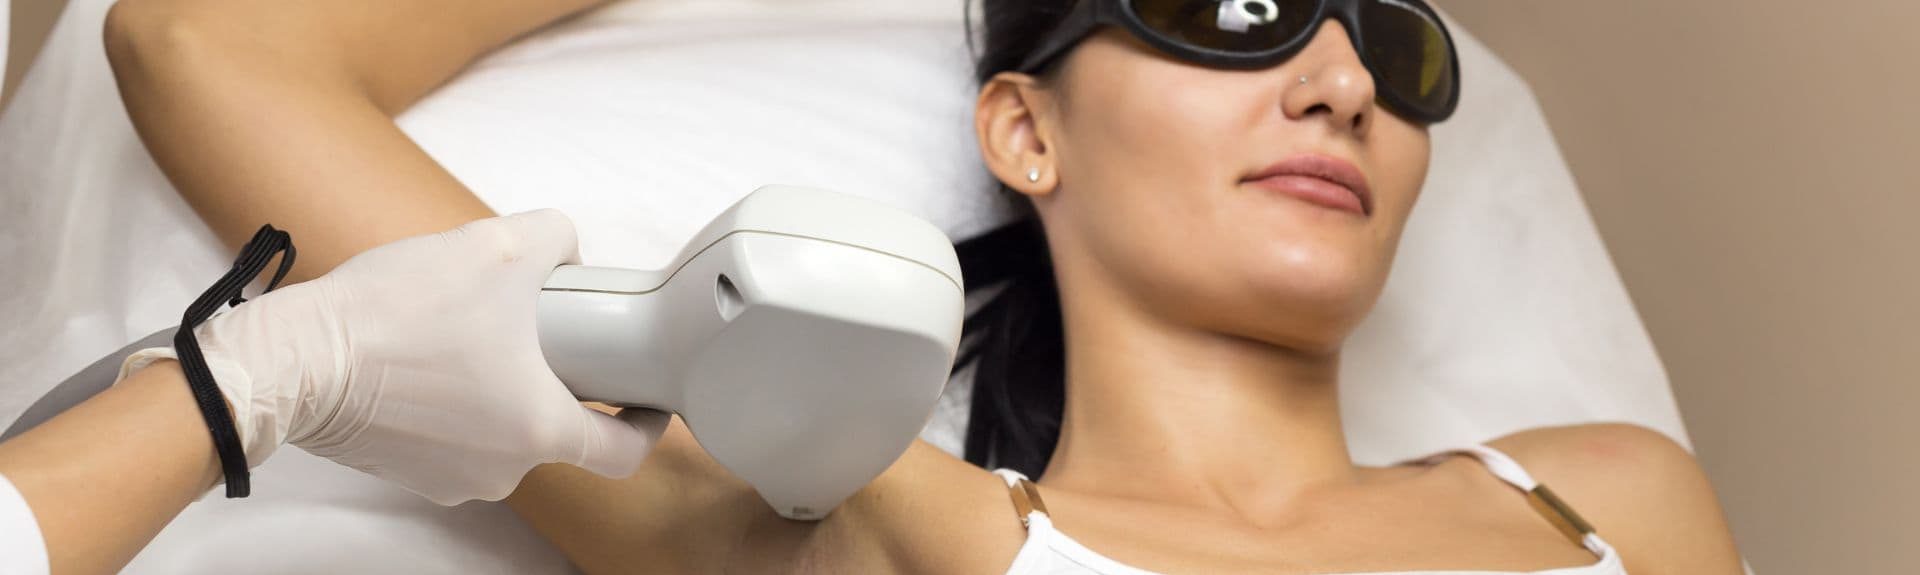 Laser Hair Removal Vs. Traditional Hair Removal Methods_ Which Is Right For You